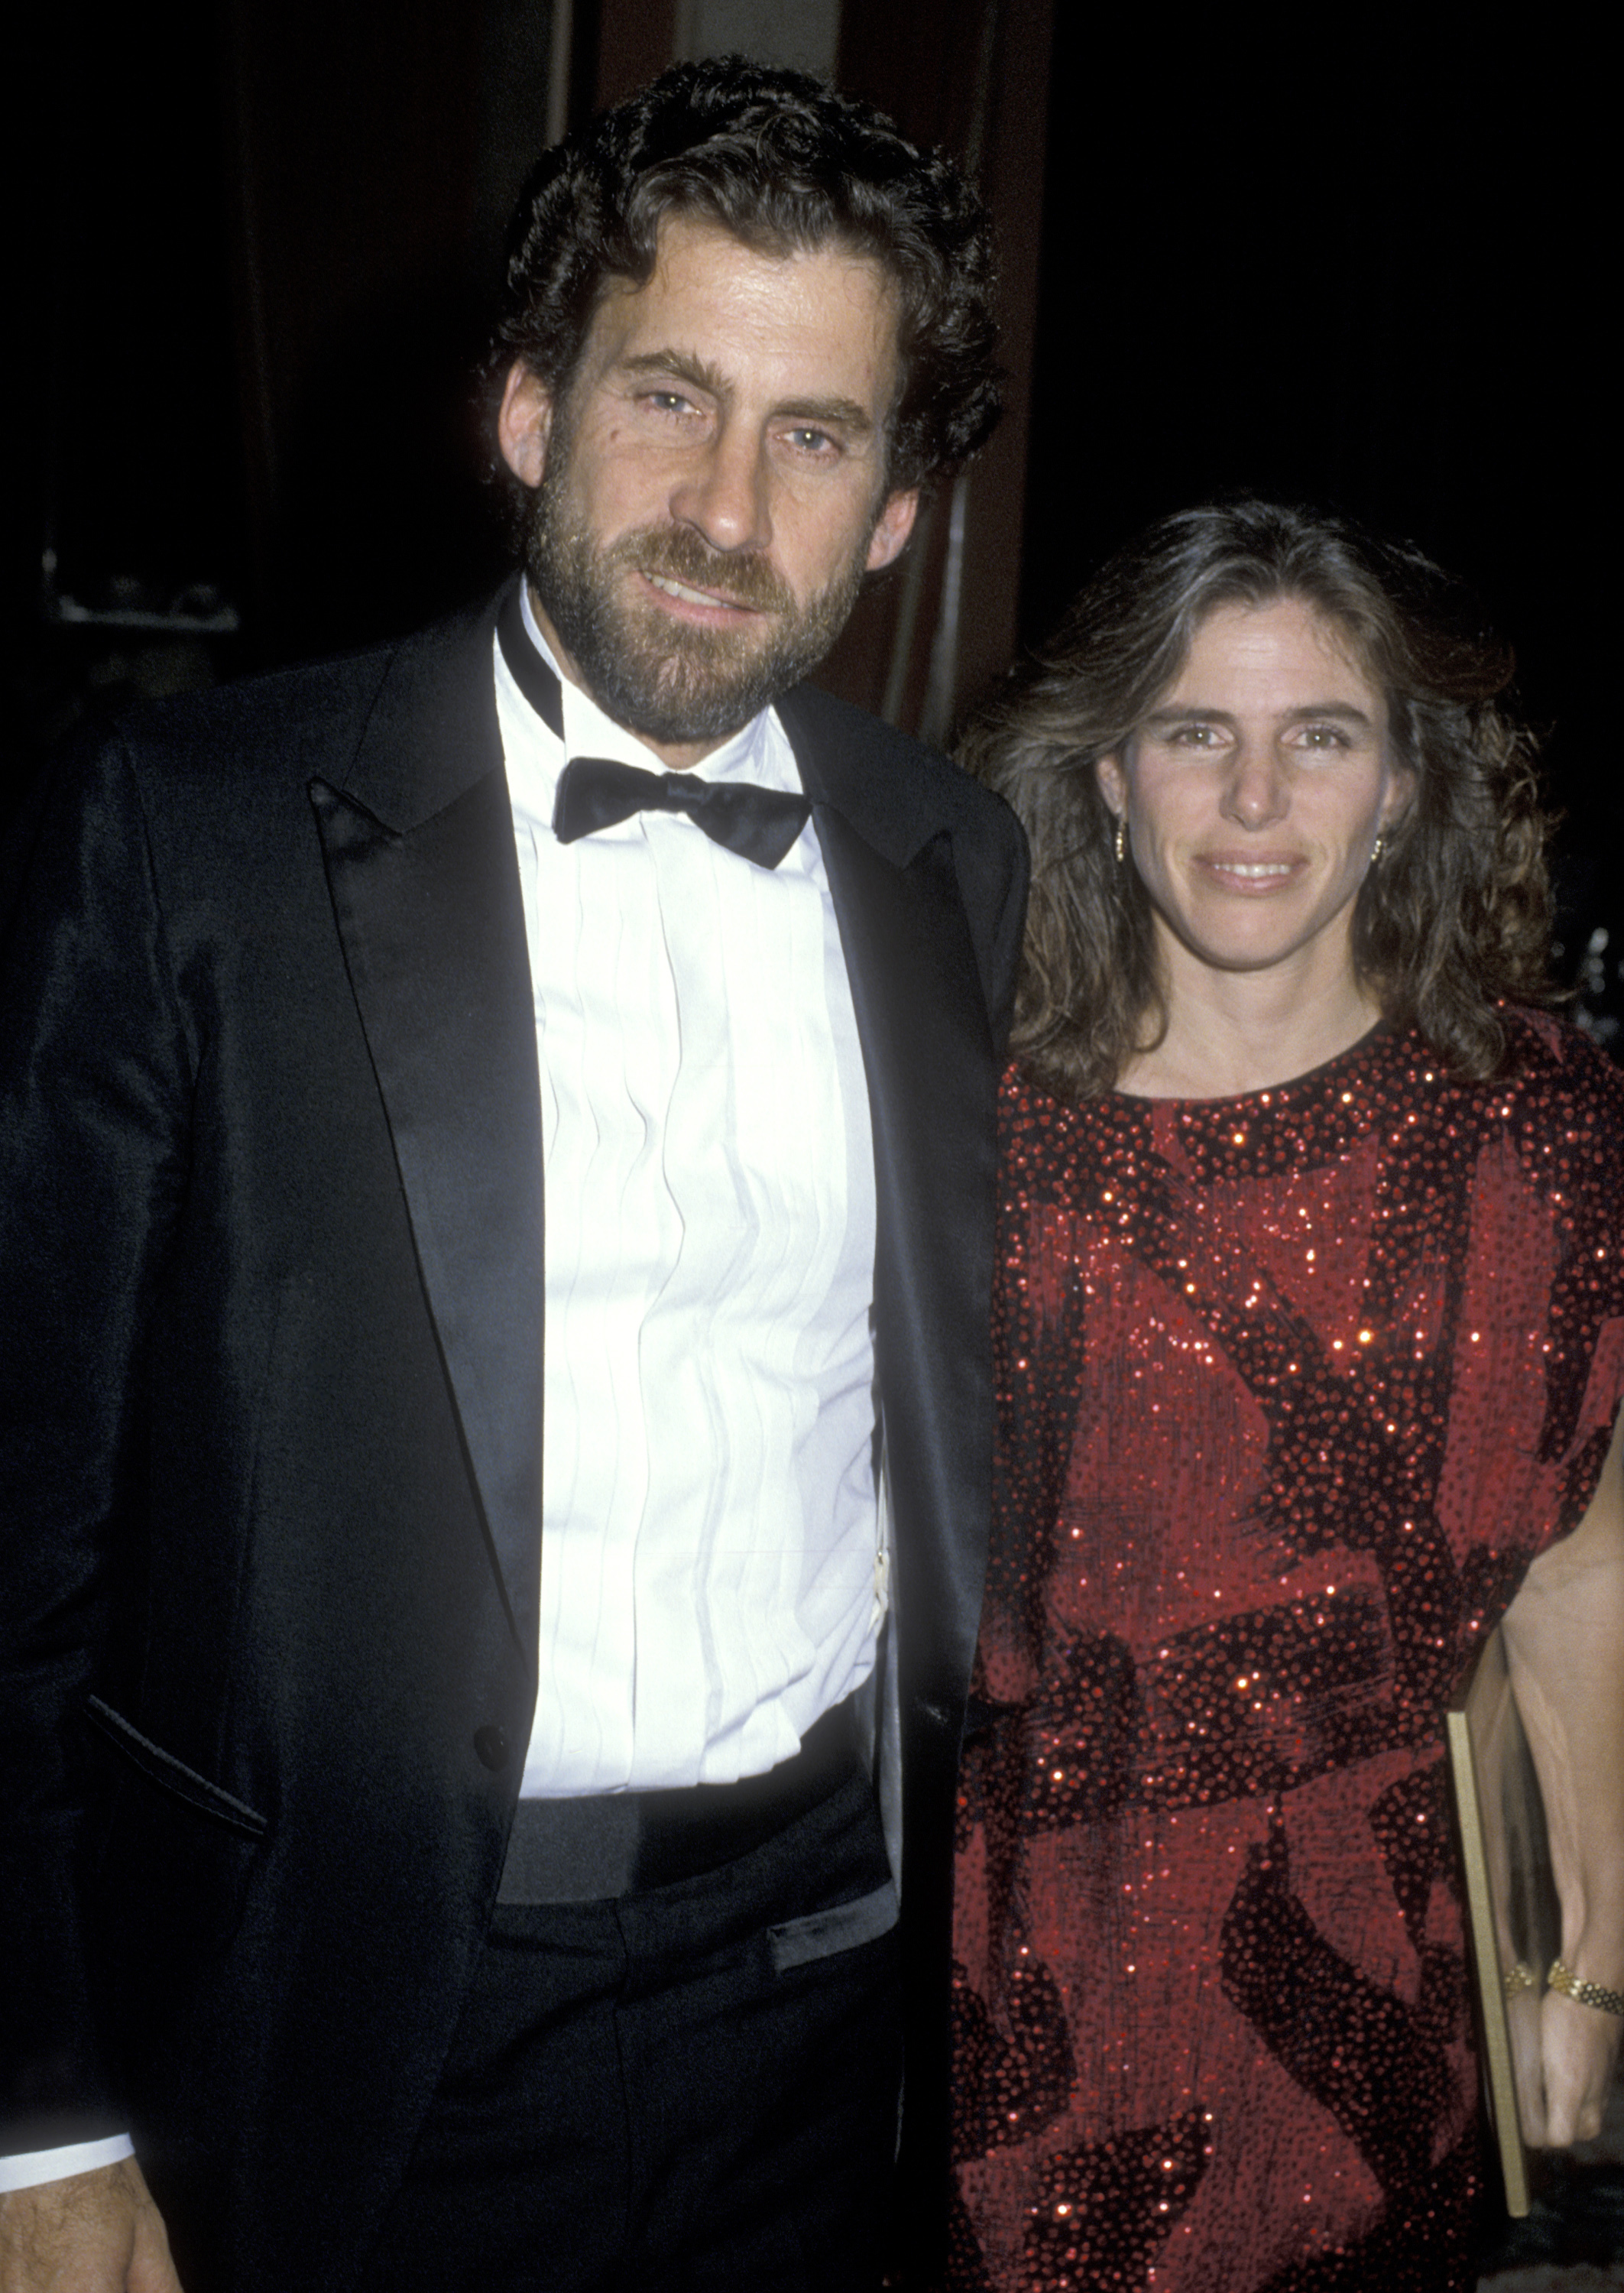 Paul Michael Glaser and Elizabeth Glaser at the Beverly Hilton Hotel in Beverly Hills on March 8, 1986 | Source: Getty Images